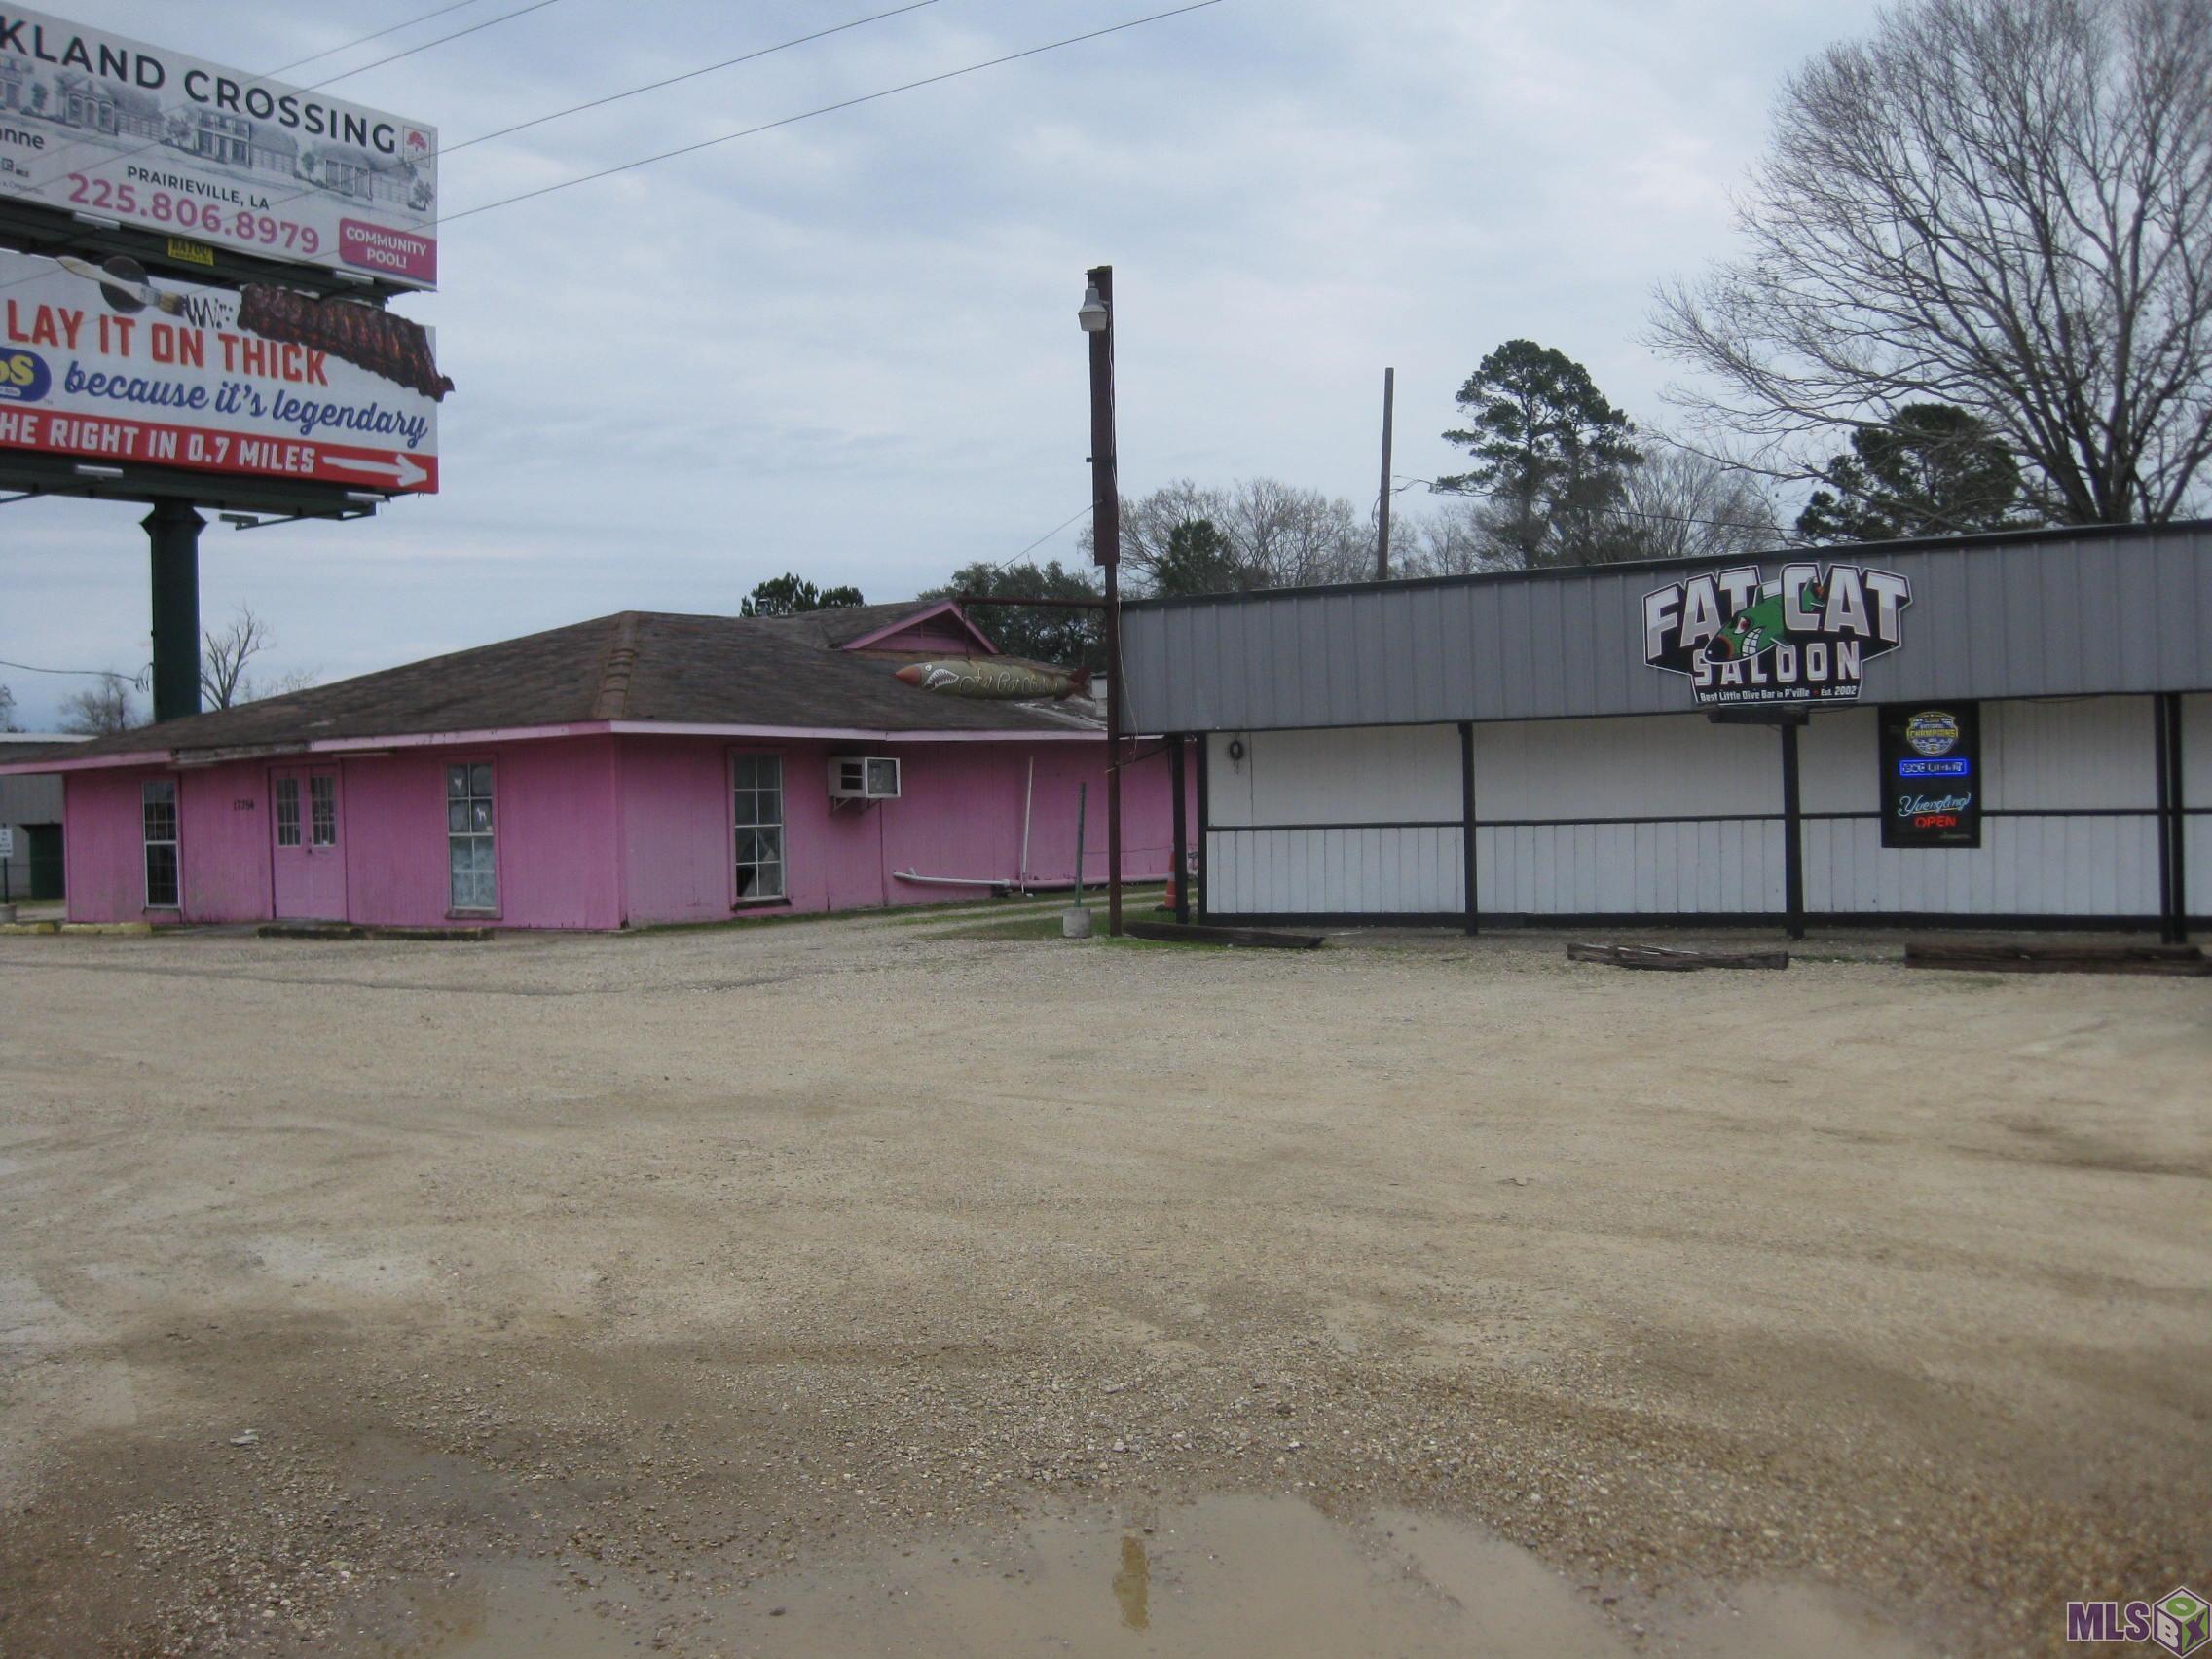 Great Location to Start Your Business!!!  1.49 Acres on Airline Hwy. in a High Traffic Area.  All buildings on property shall be sold at NO value.  Building is currently leased as a bar.  Small house is rented.  Do Not Disturb the tenants.